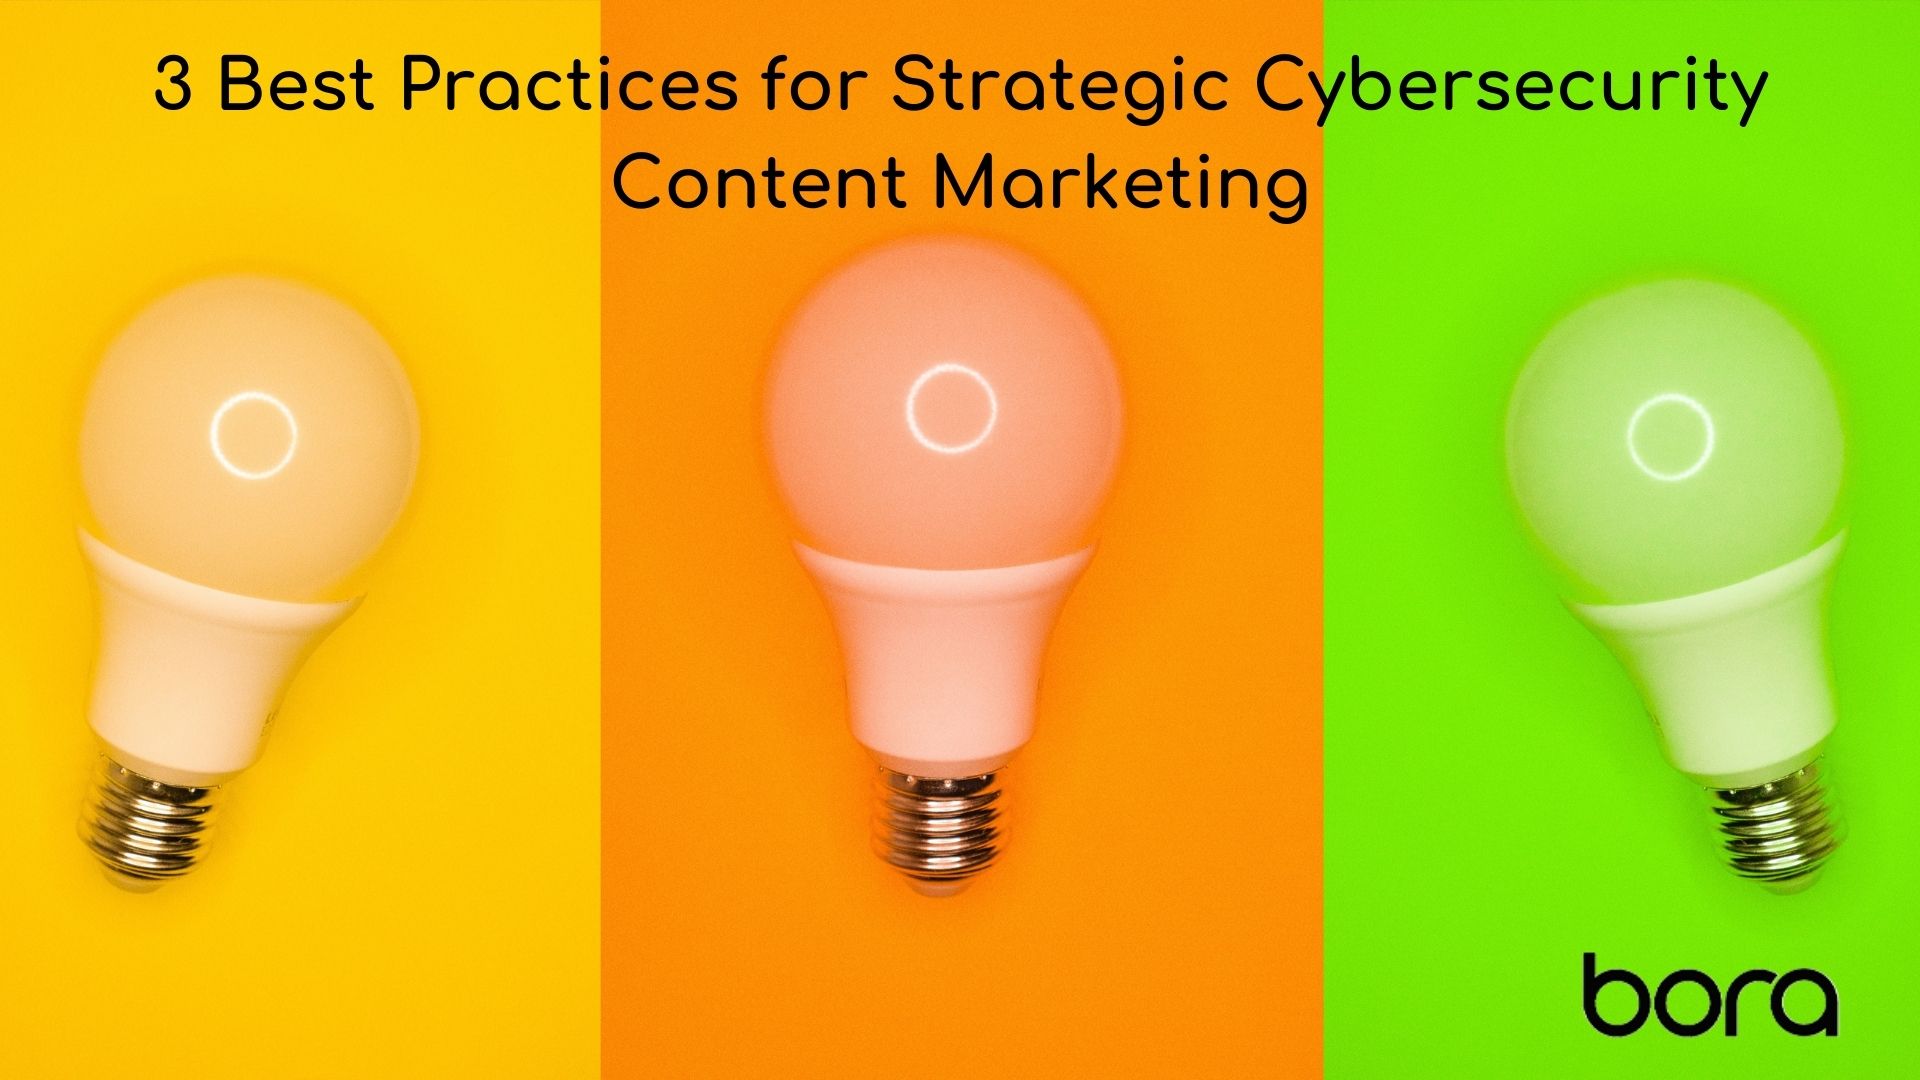 3 Best Practices for Strategic Cybersecurity Content Marketing